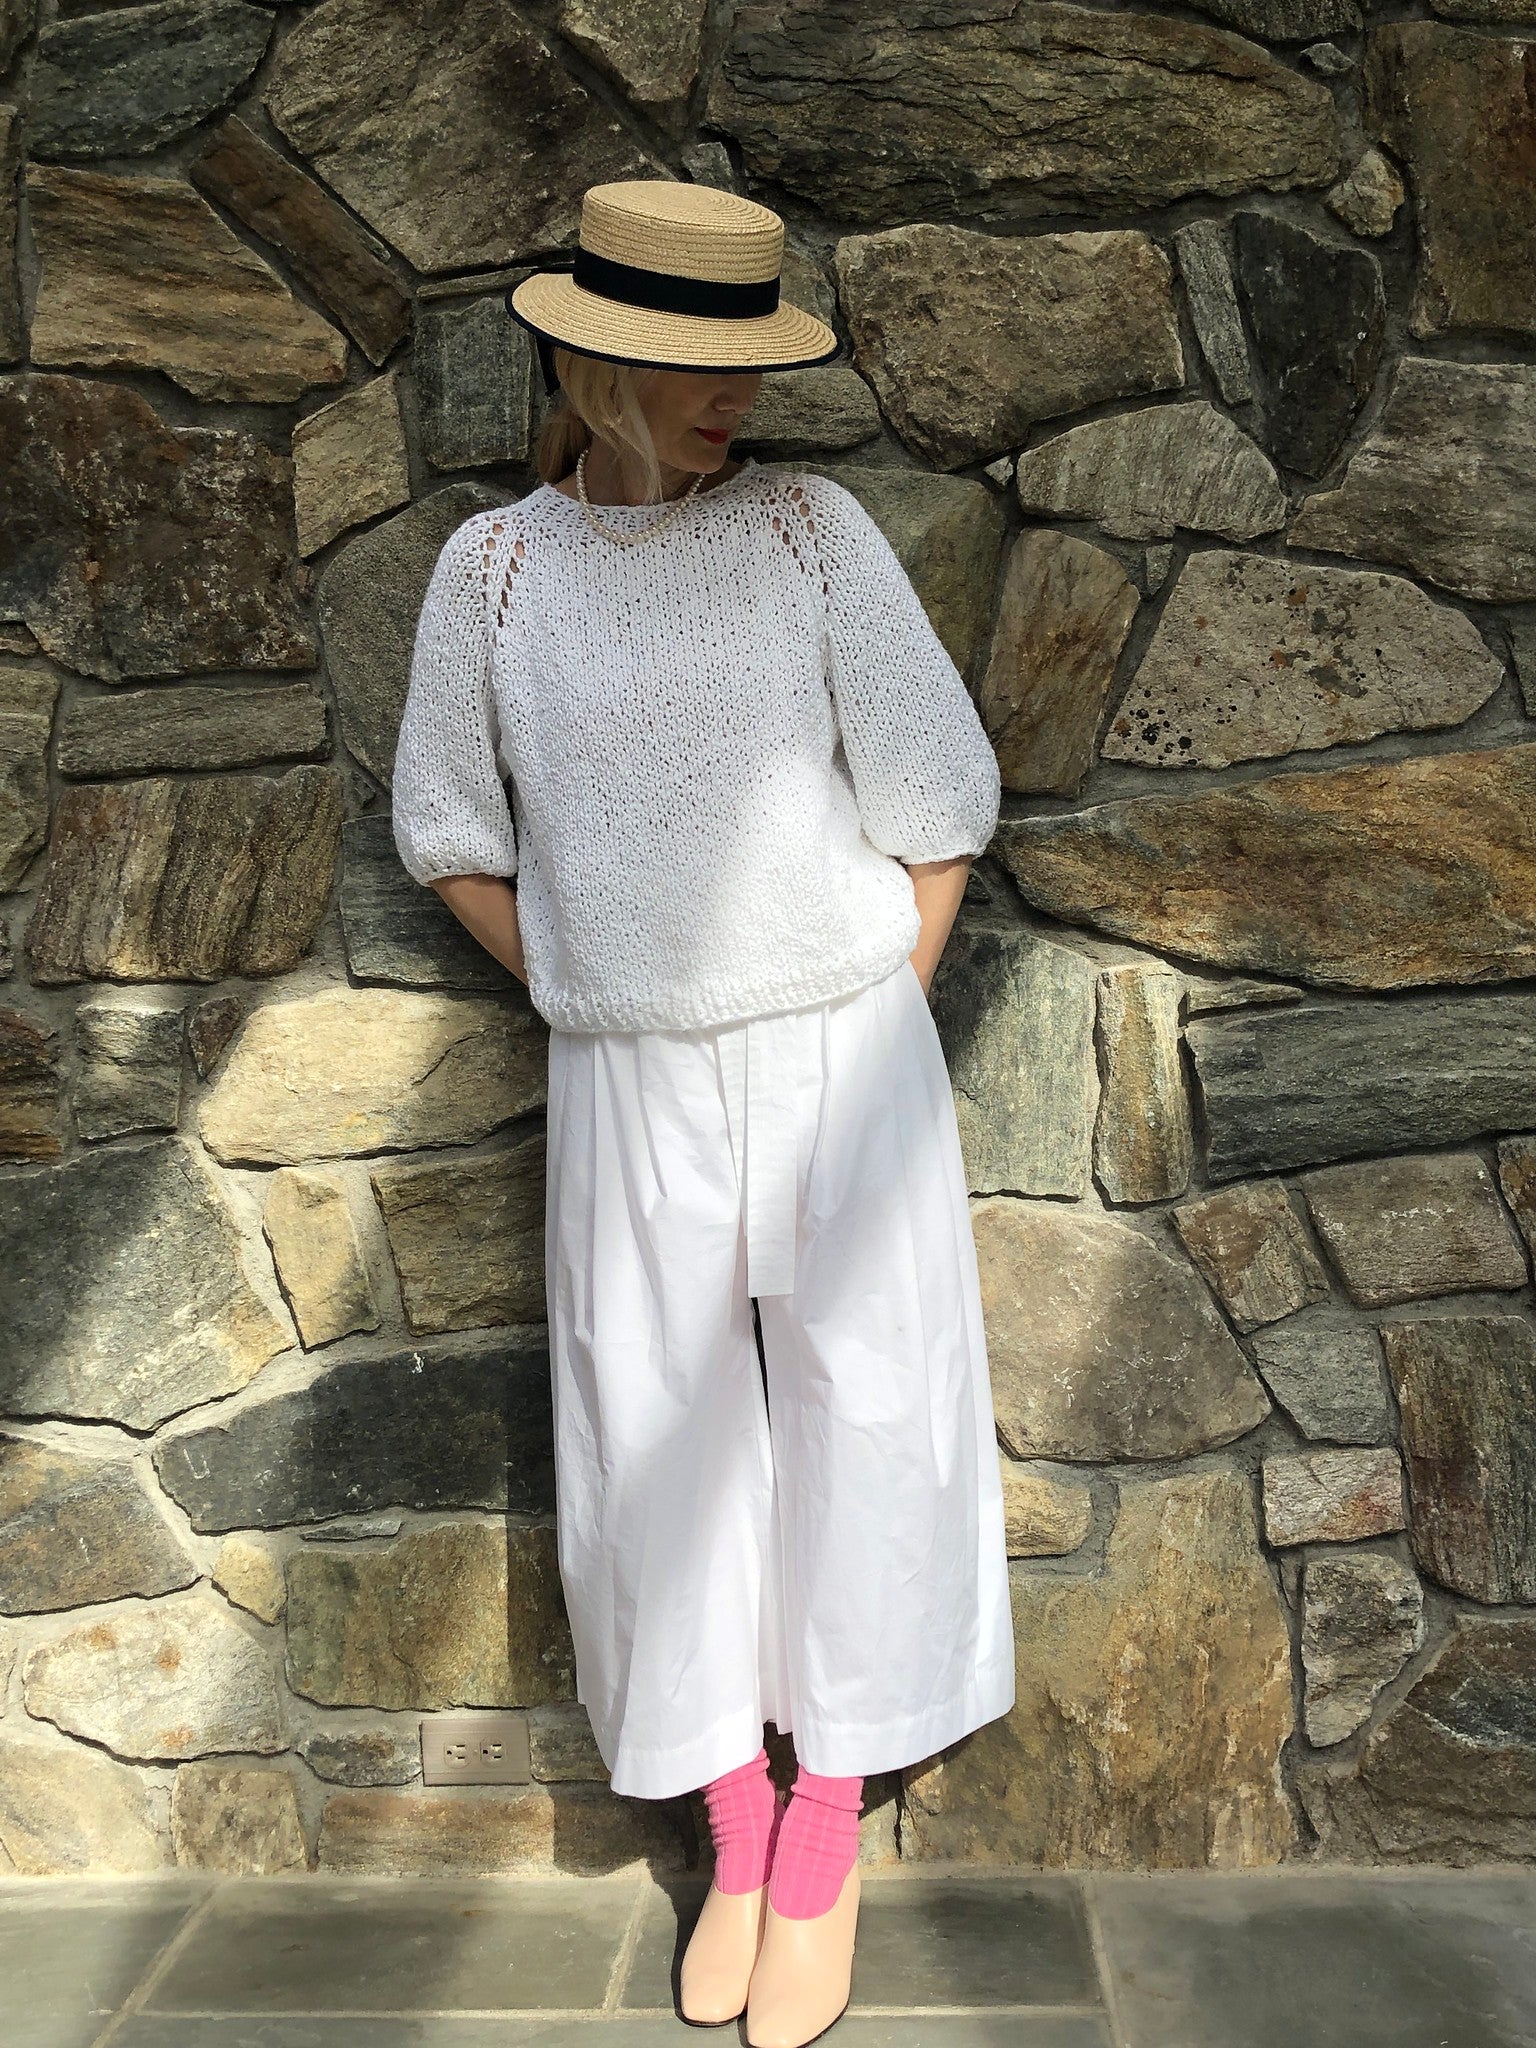 Summer Tee AND Top-Down Sweater PATTERN- Summer yarn